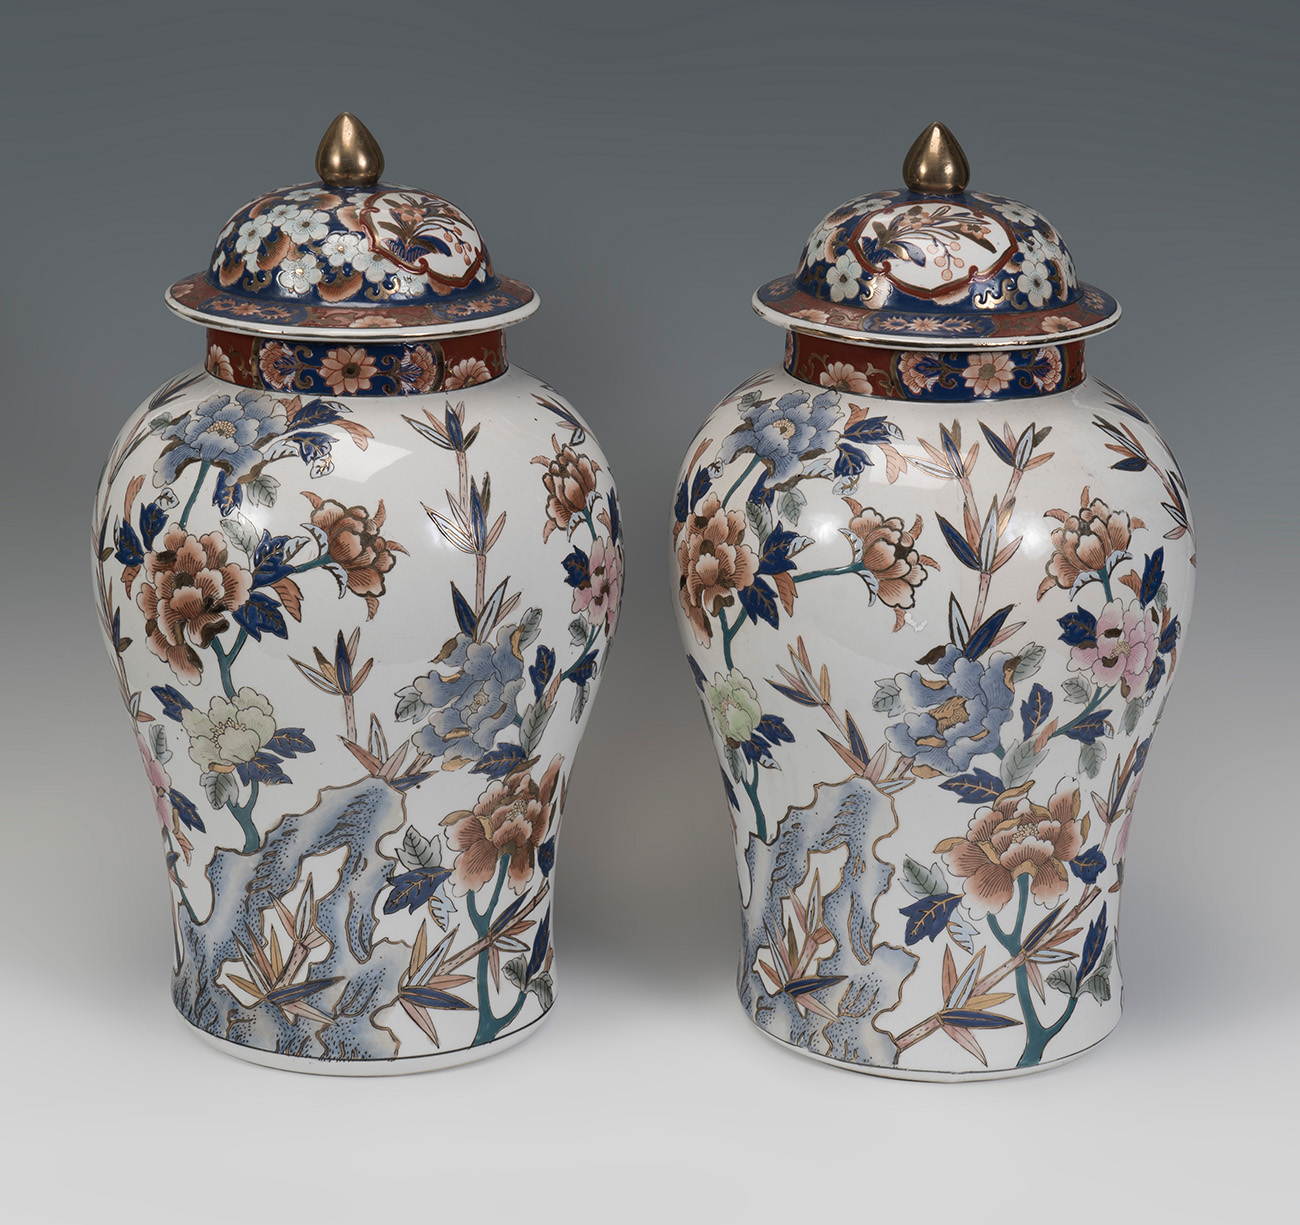 Pair of Imari style tibors; China, late 19th - early 20th century.Hand-painted porcelain.Signed on